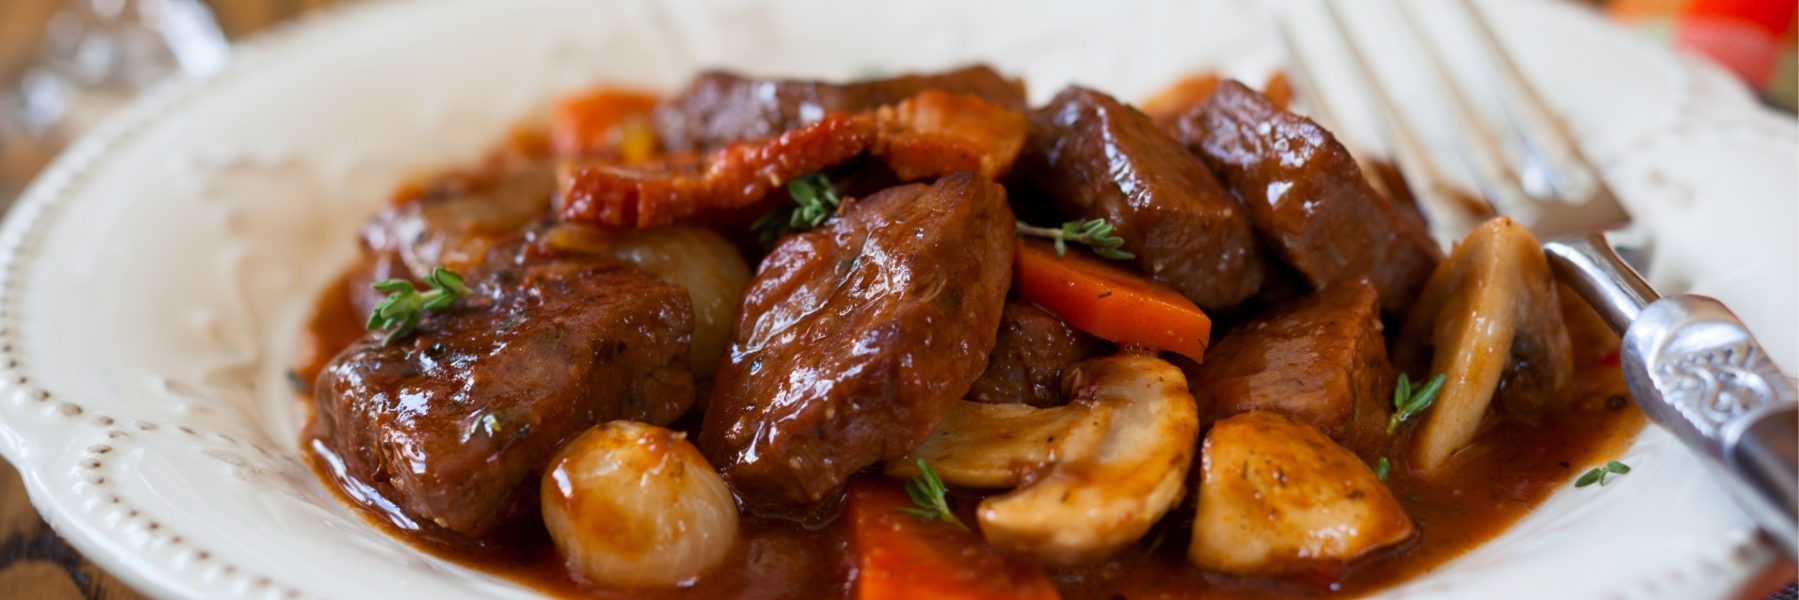 Stew cooked by personal chef in Cotswolds